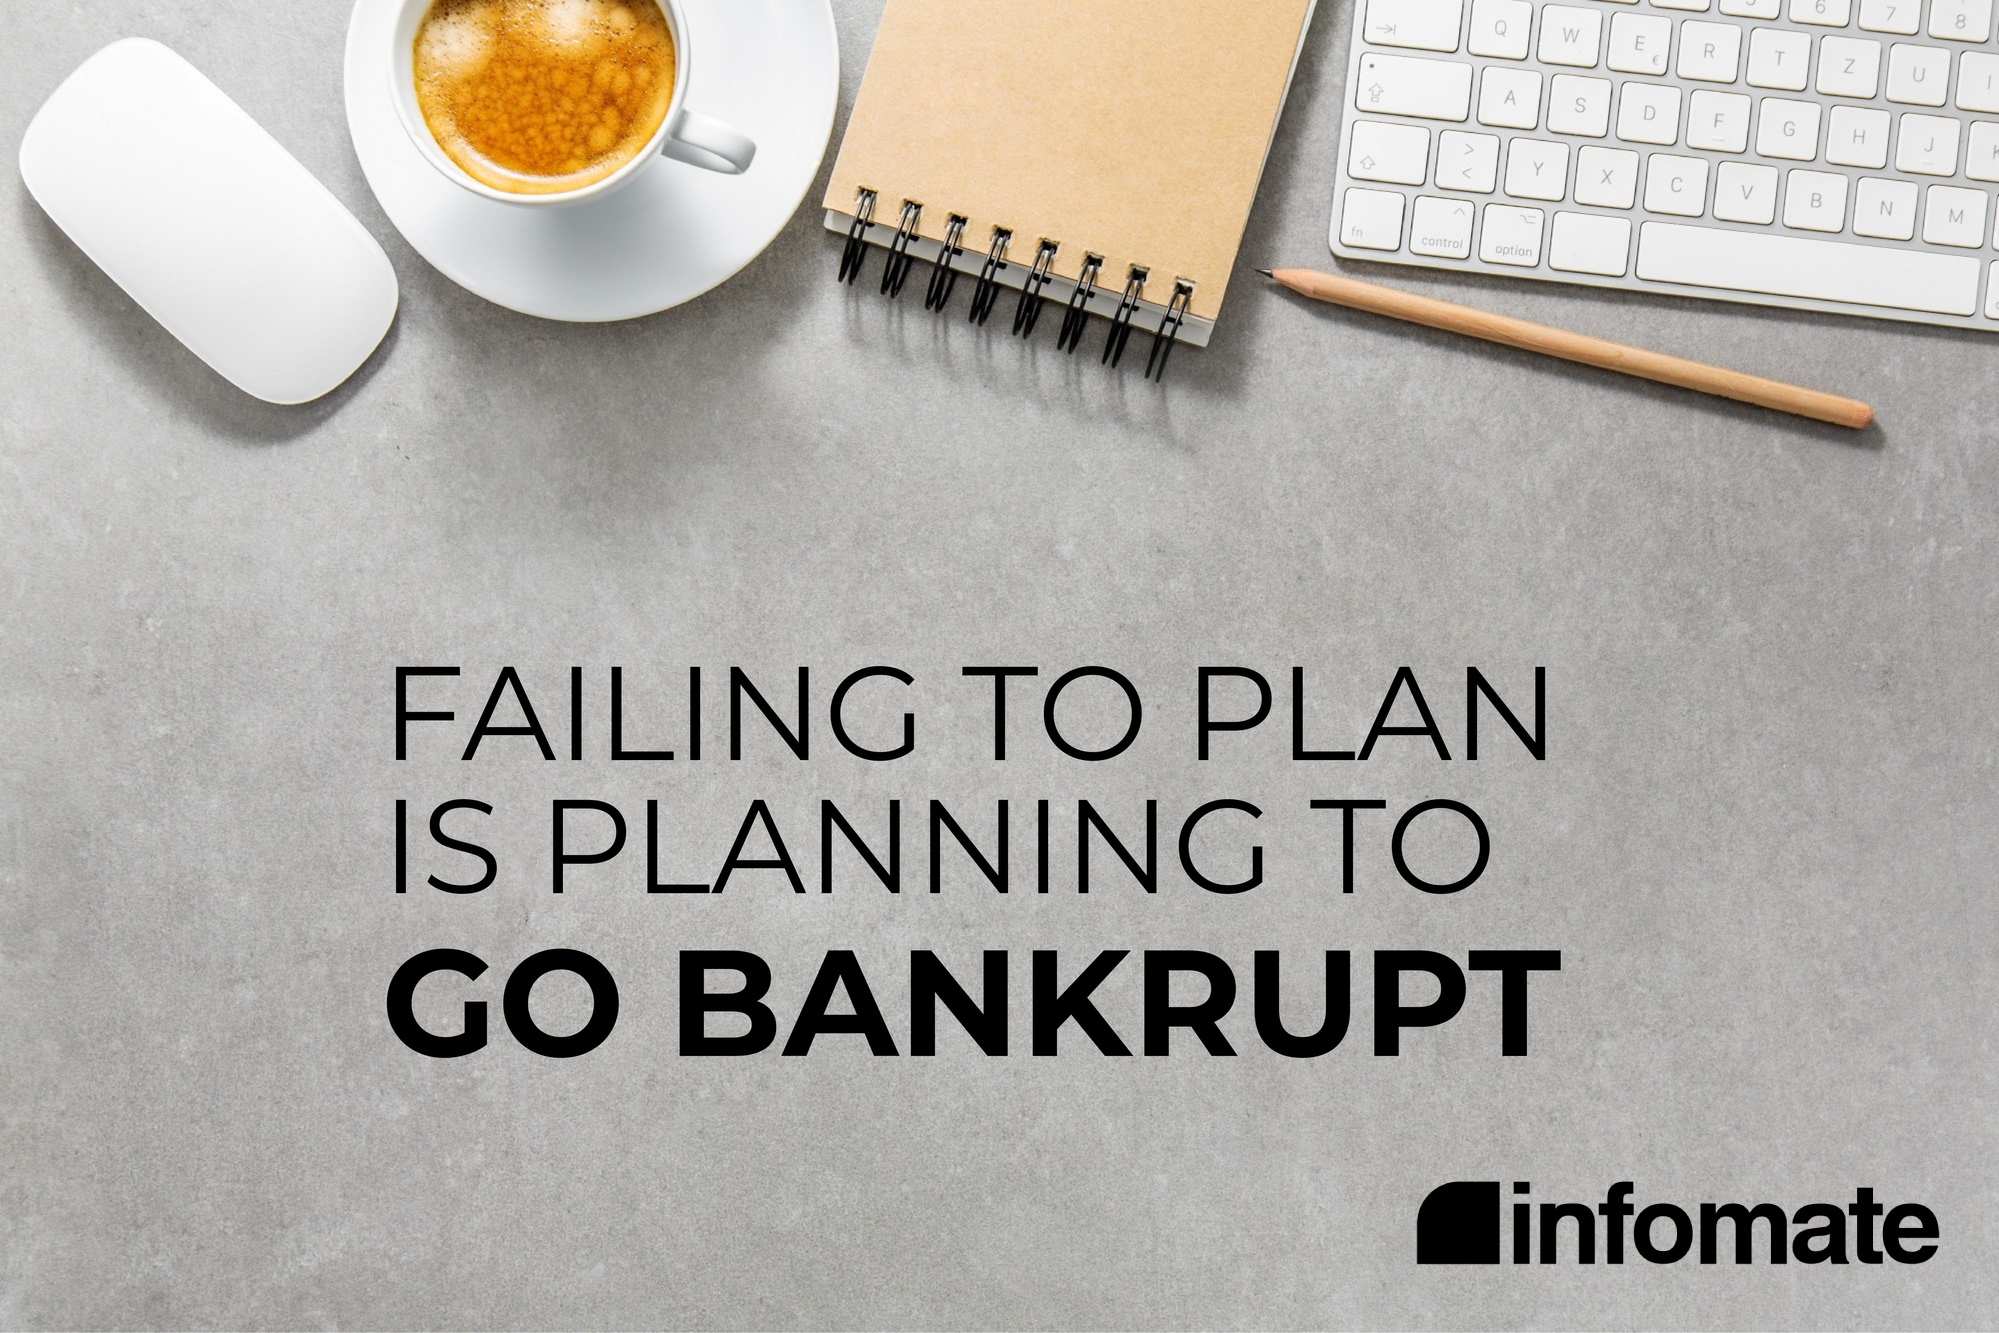 FAILING TO PLAN IS PLANNING TO GO BANKRUPT